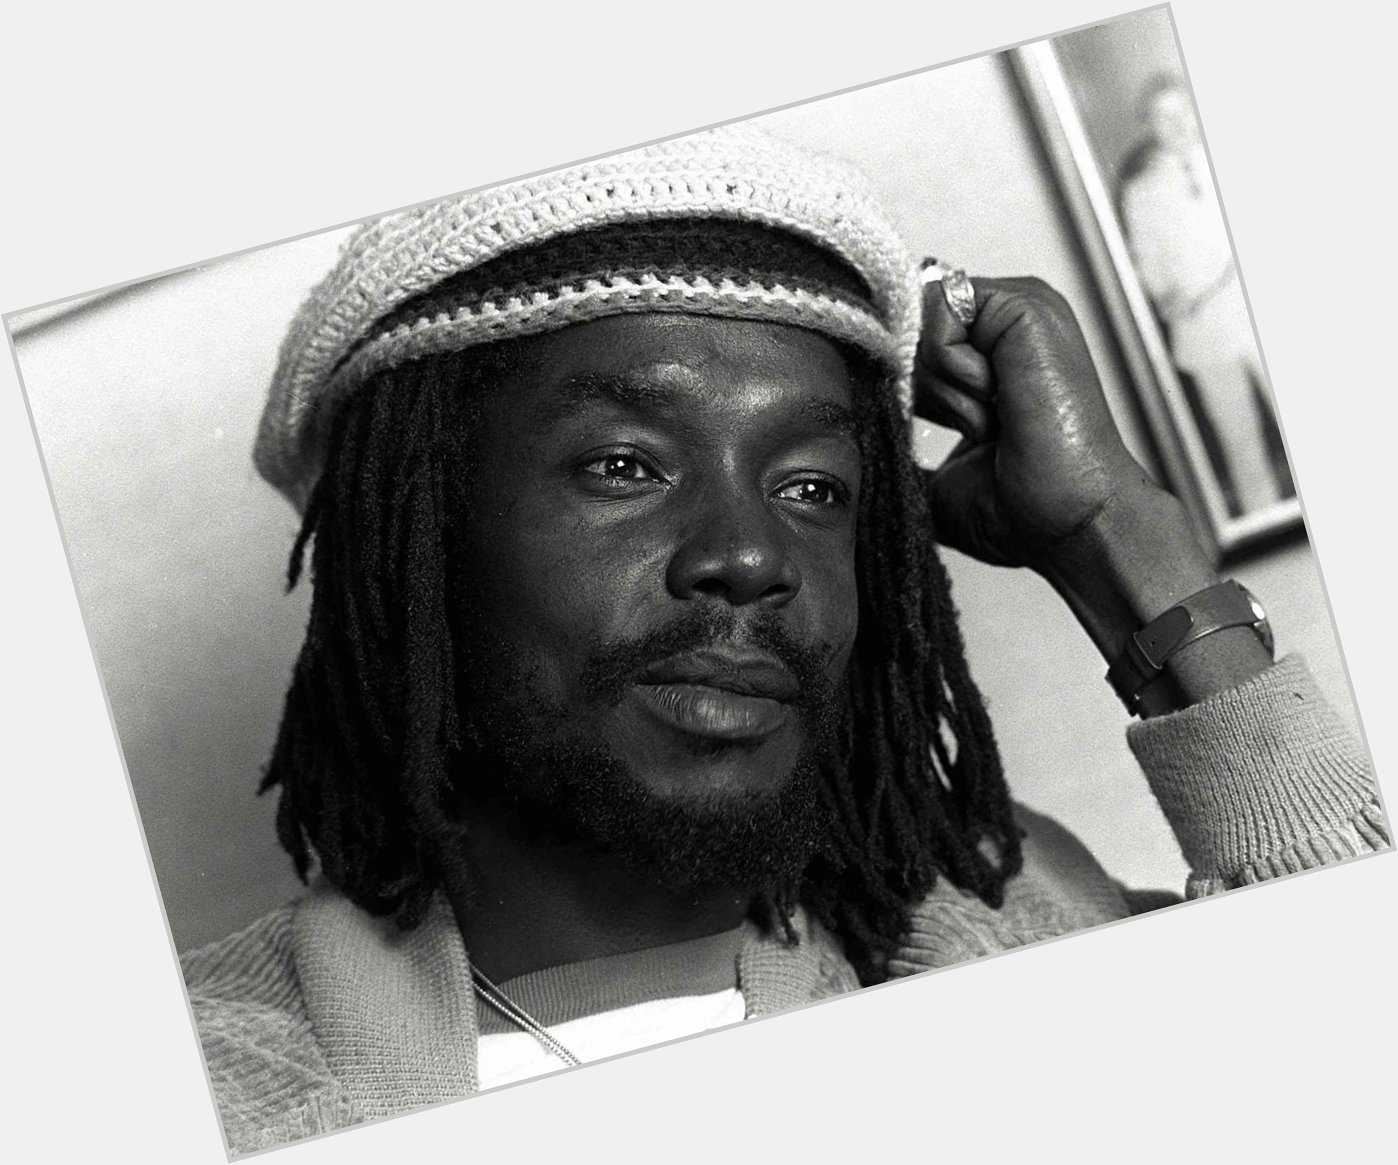  on with wishes Peter Tosh a happy birthday! 